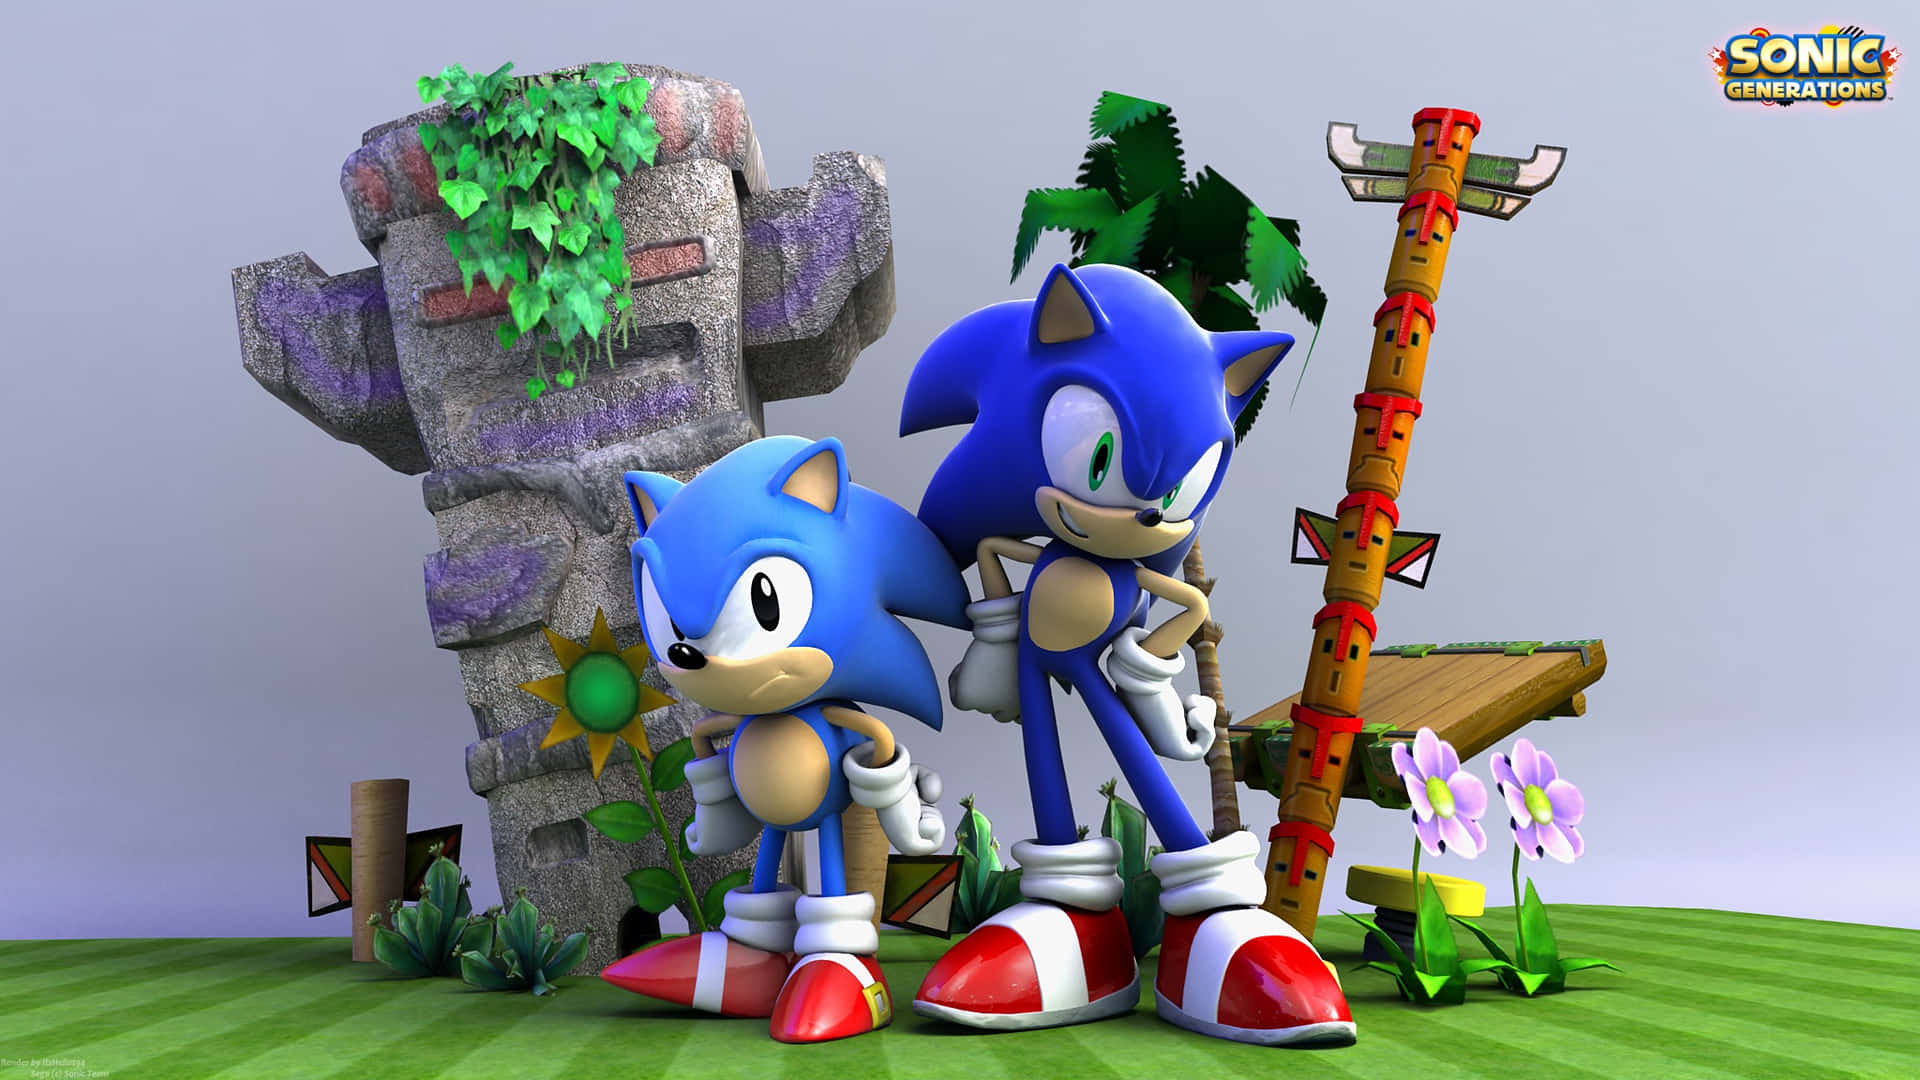 Sonic Generations Game Characters in Action Wallpaper